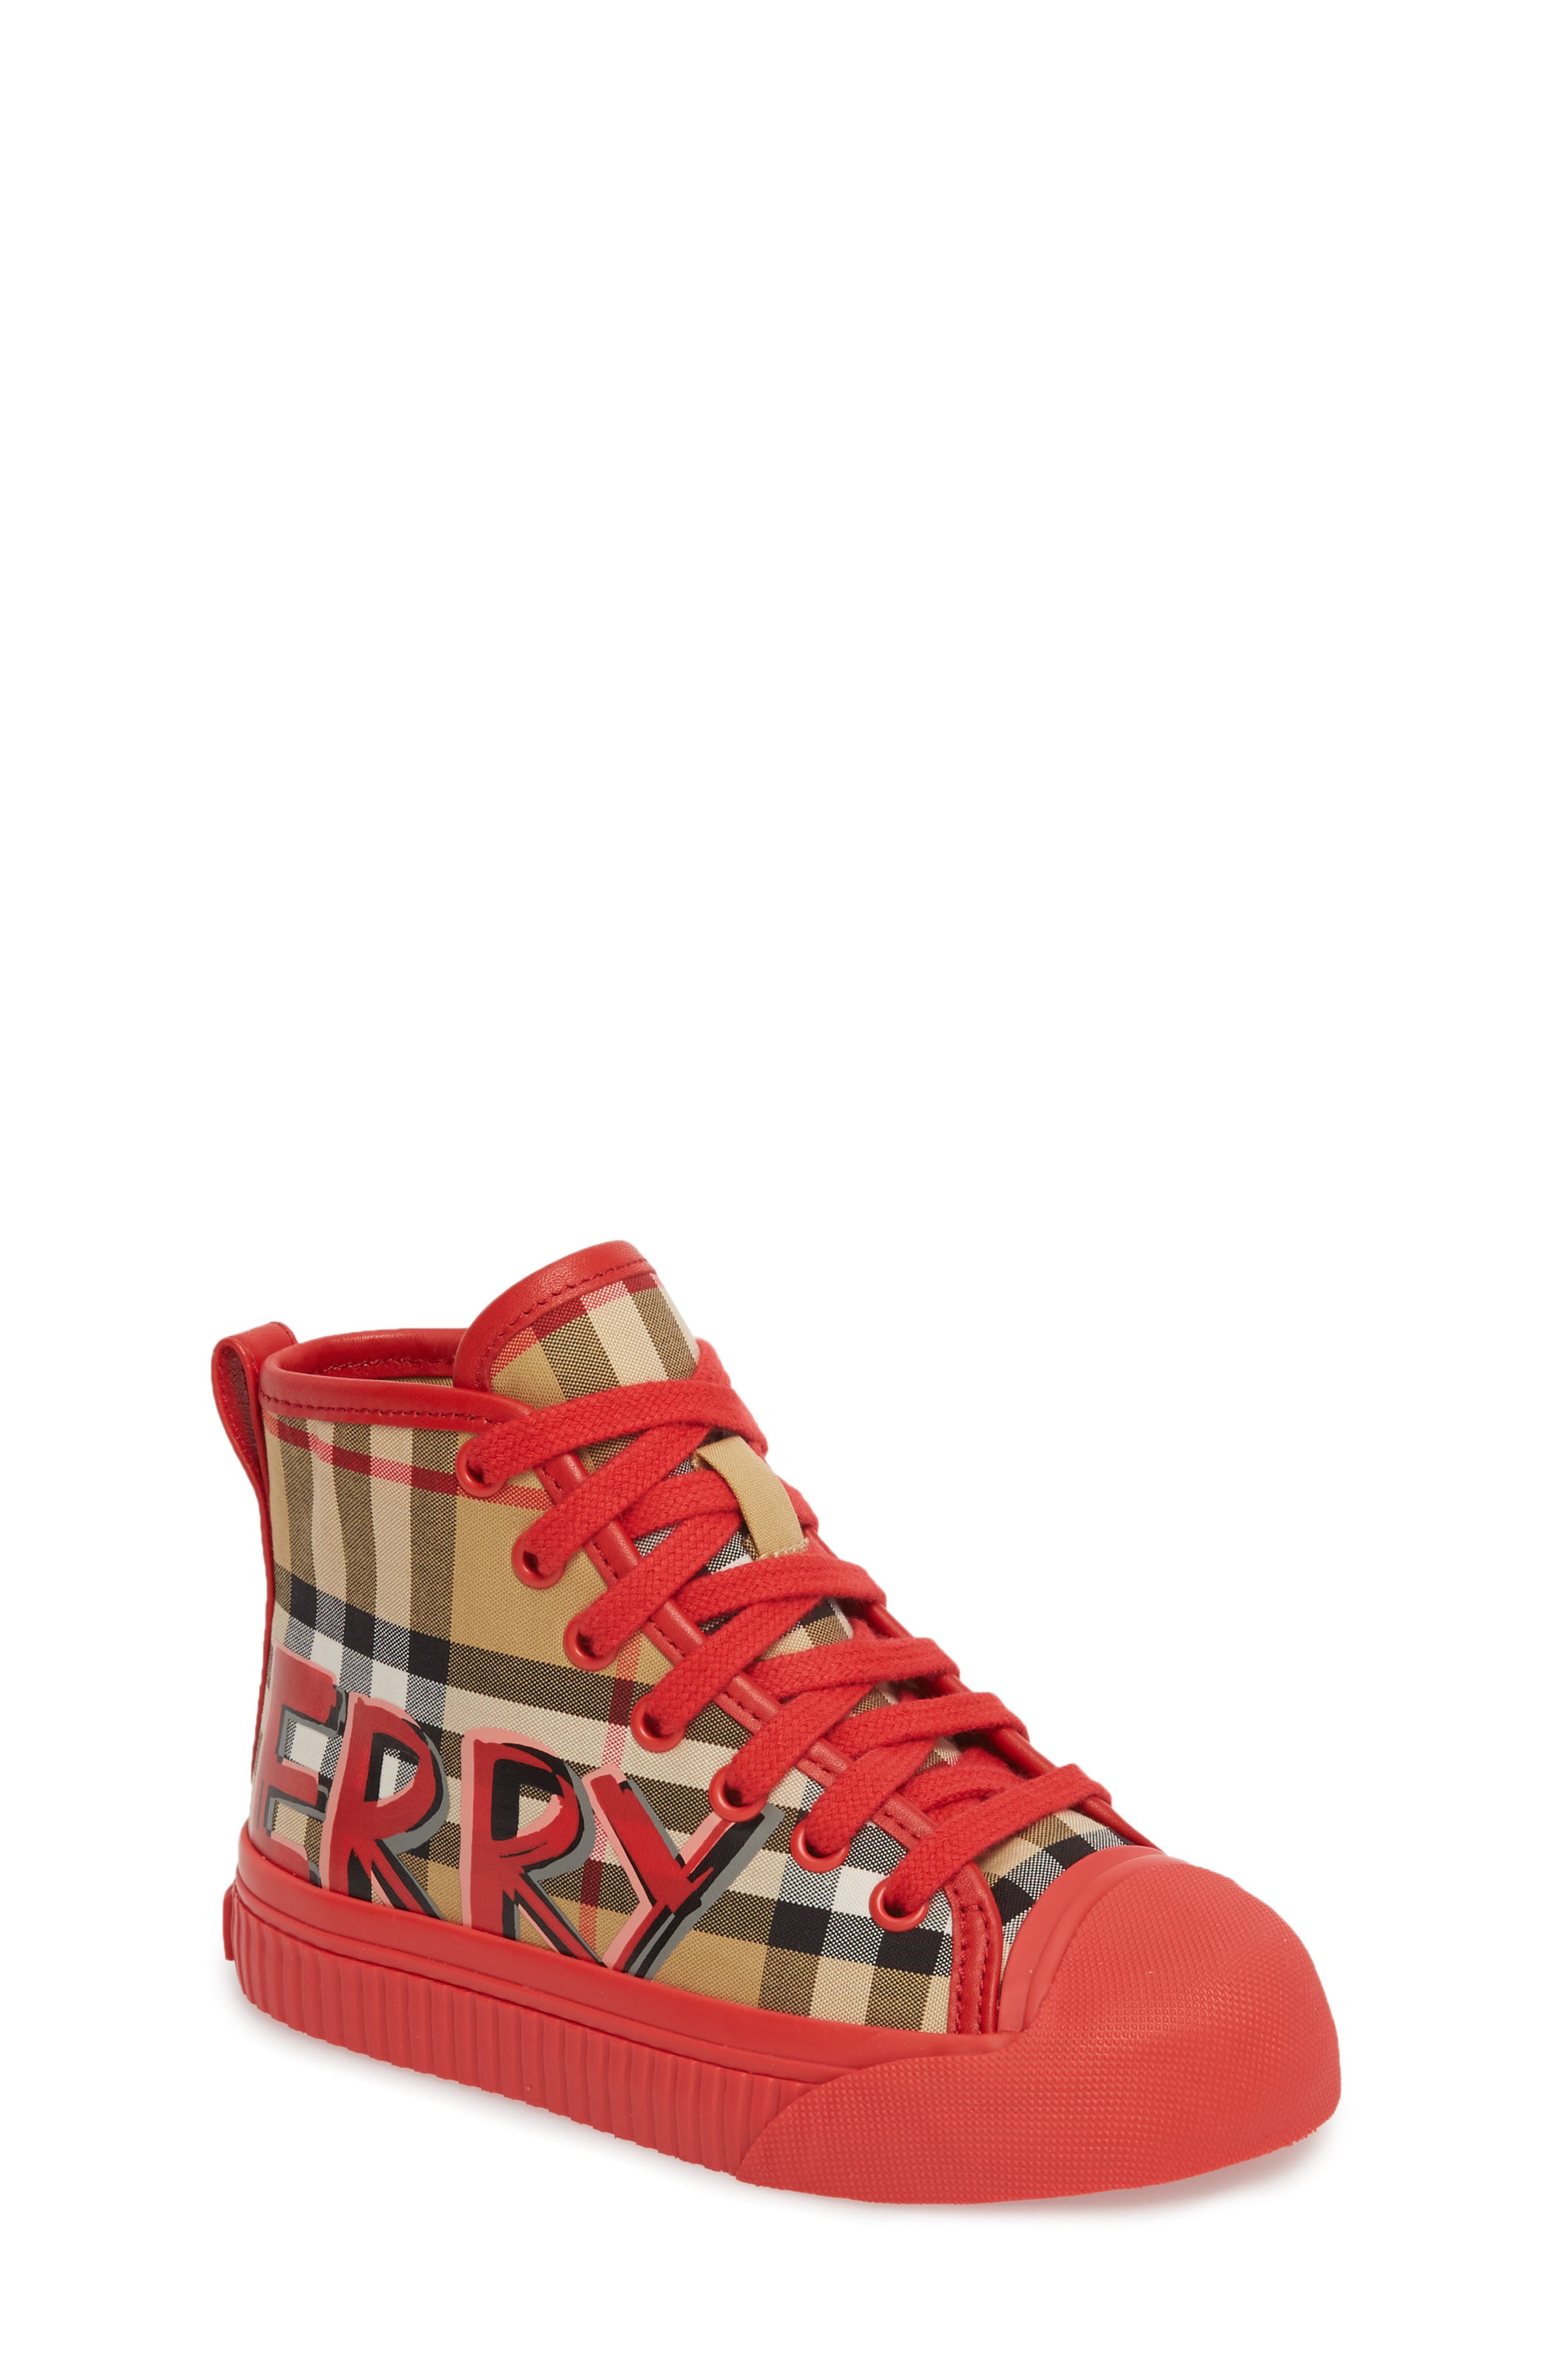 burberry shoes kids red